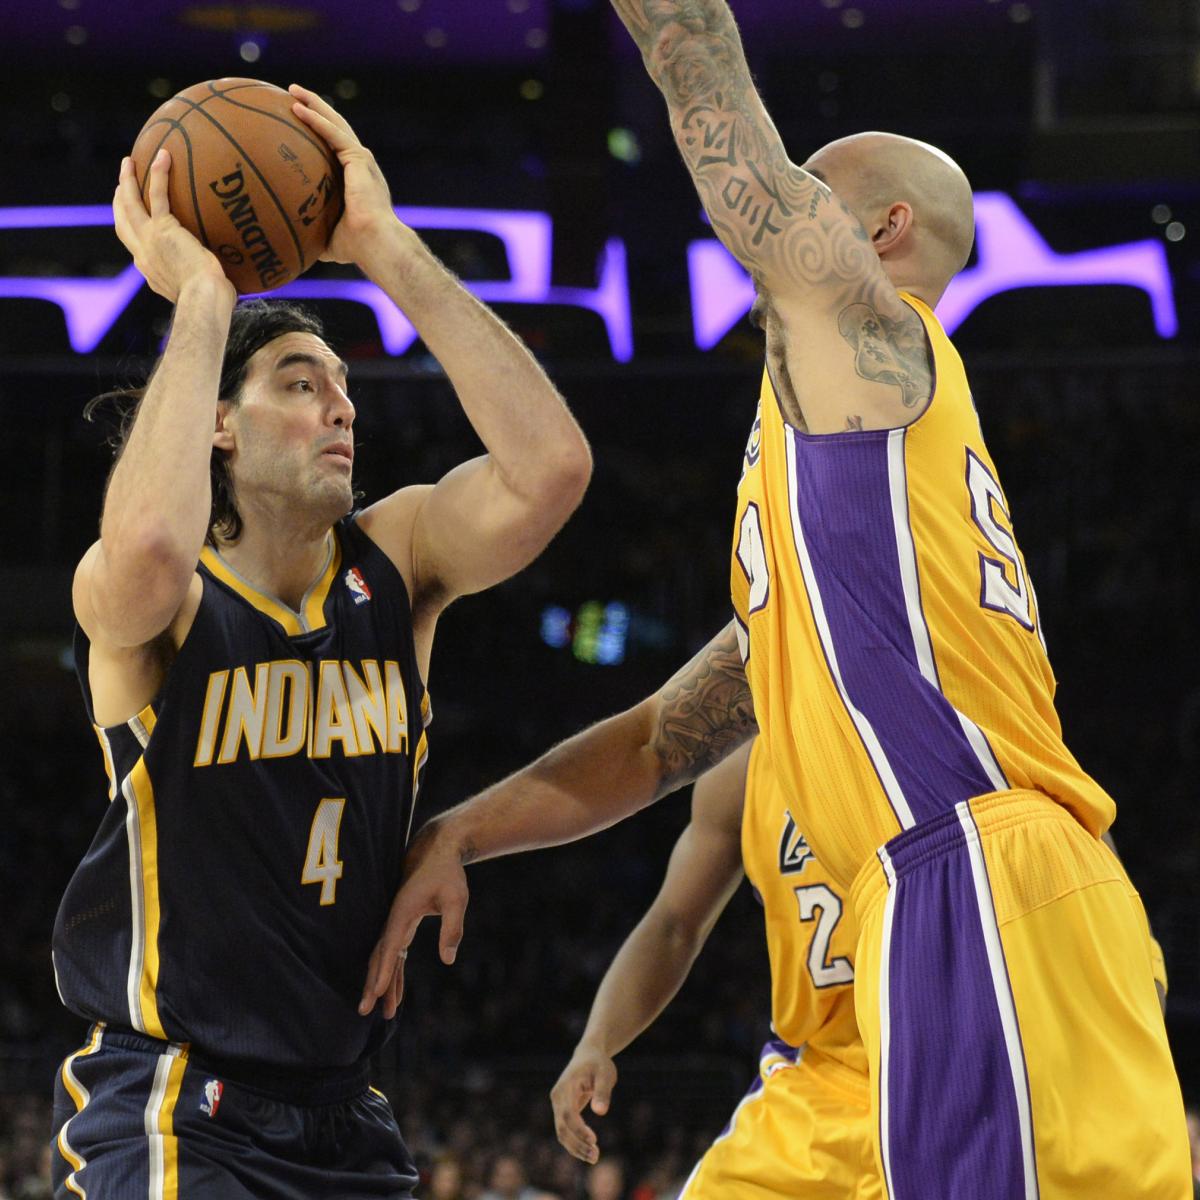 Indiana Pacers vs. Los Angeles Lakers Live Score and Analysis News